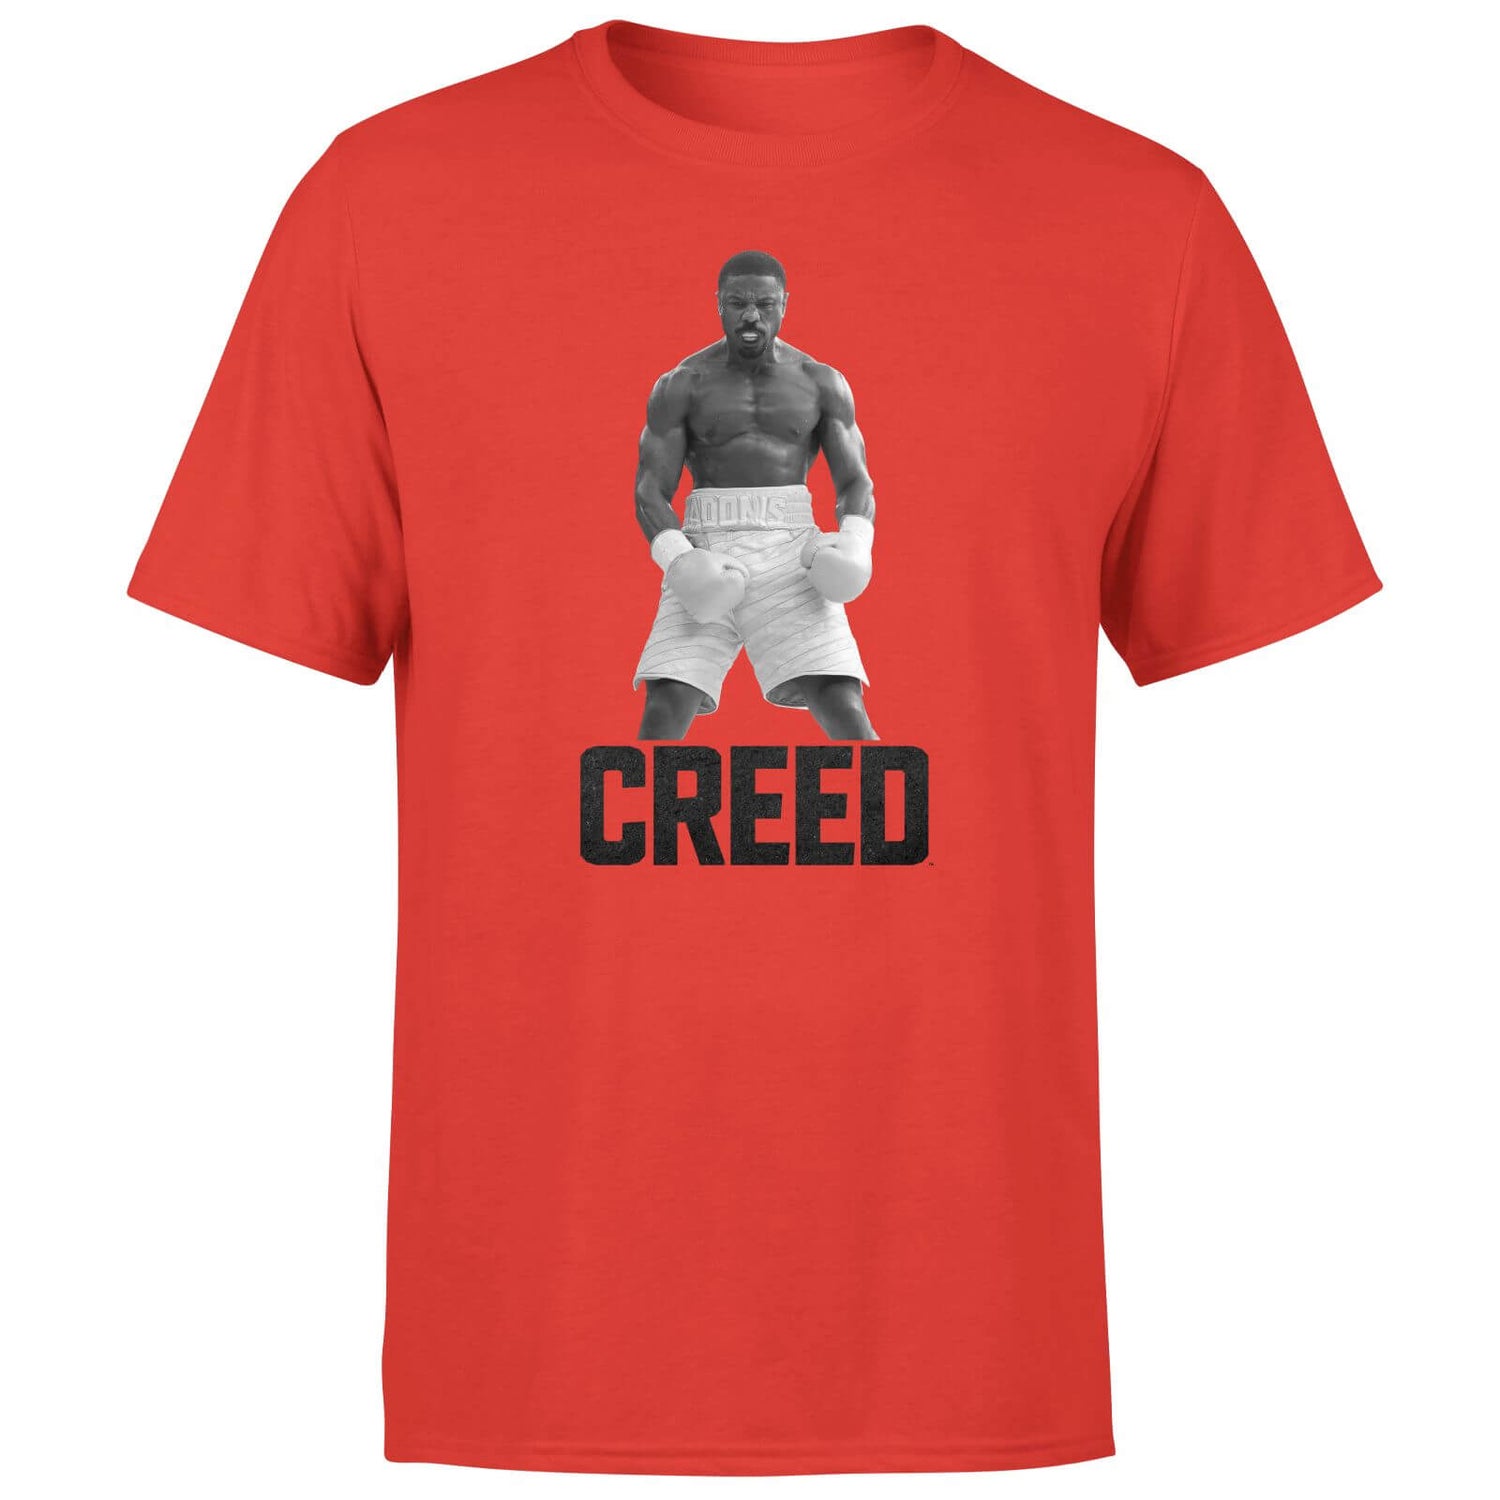 Creed Victory Men's T-Shirt - Red